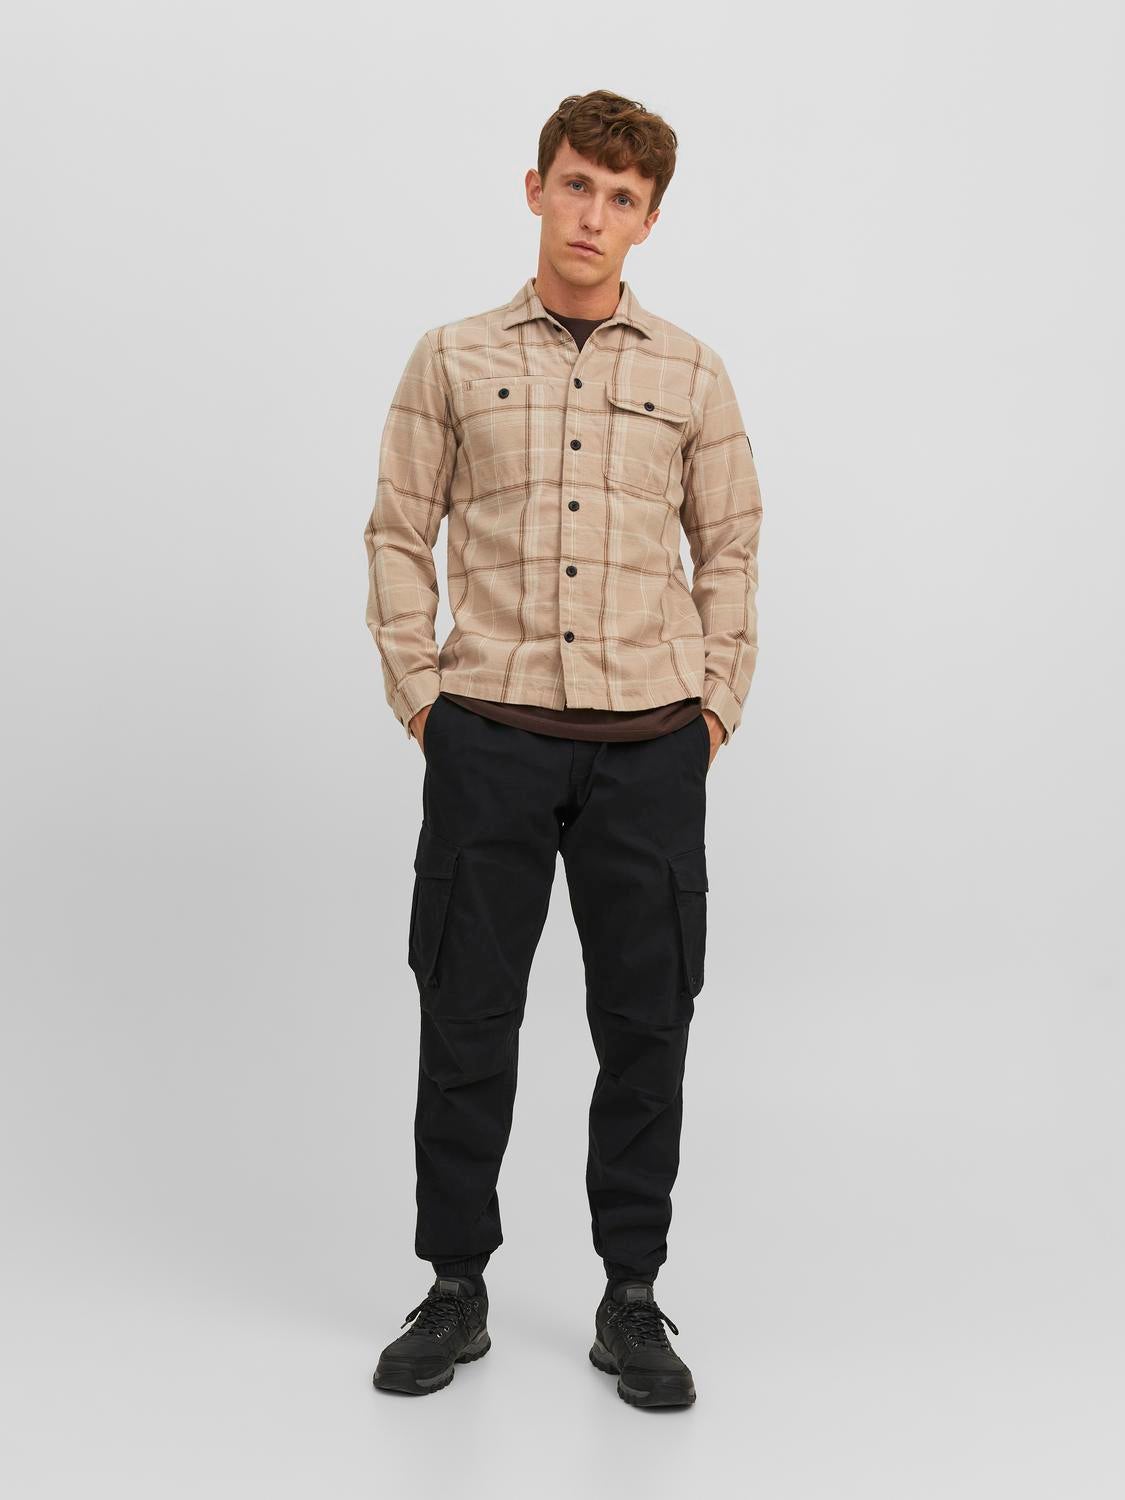 & Cargo Black | Jack Relaxed | Jones® trousers Fit